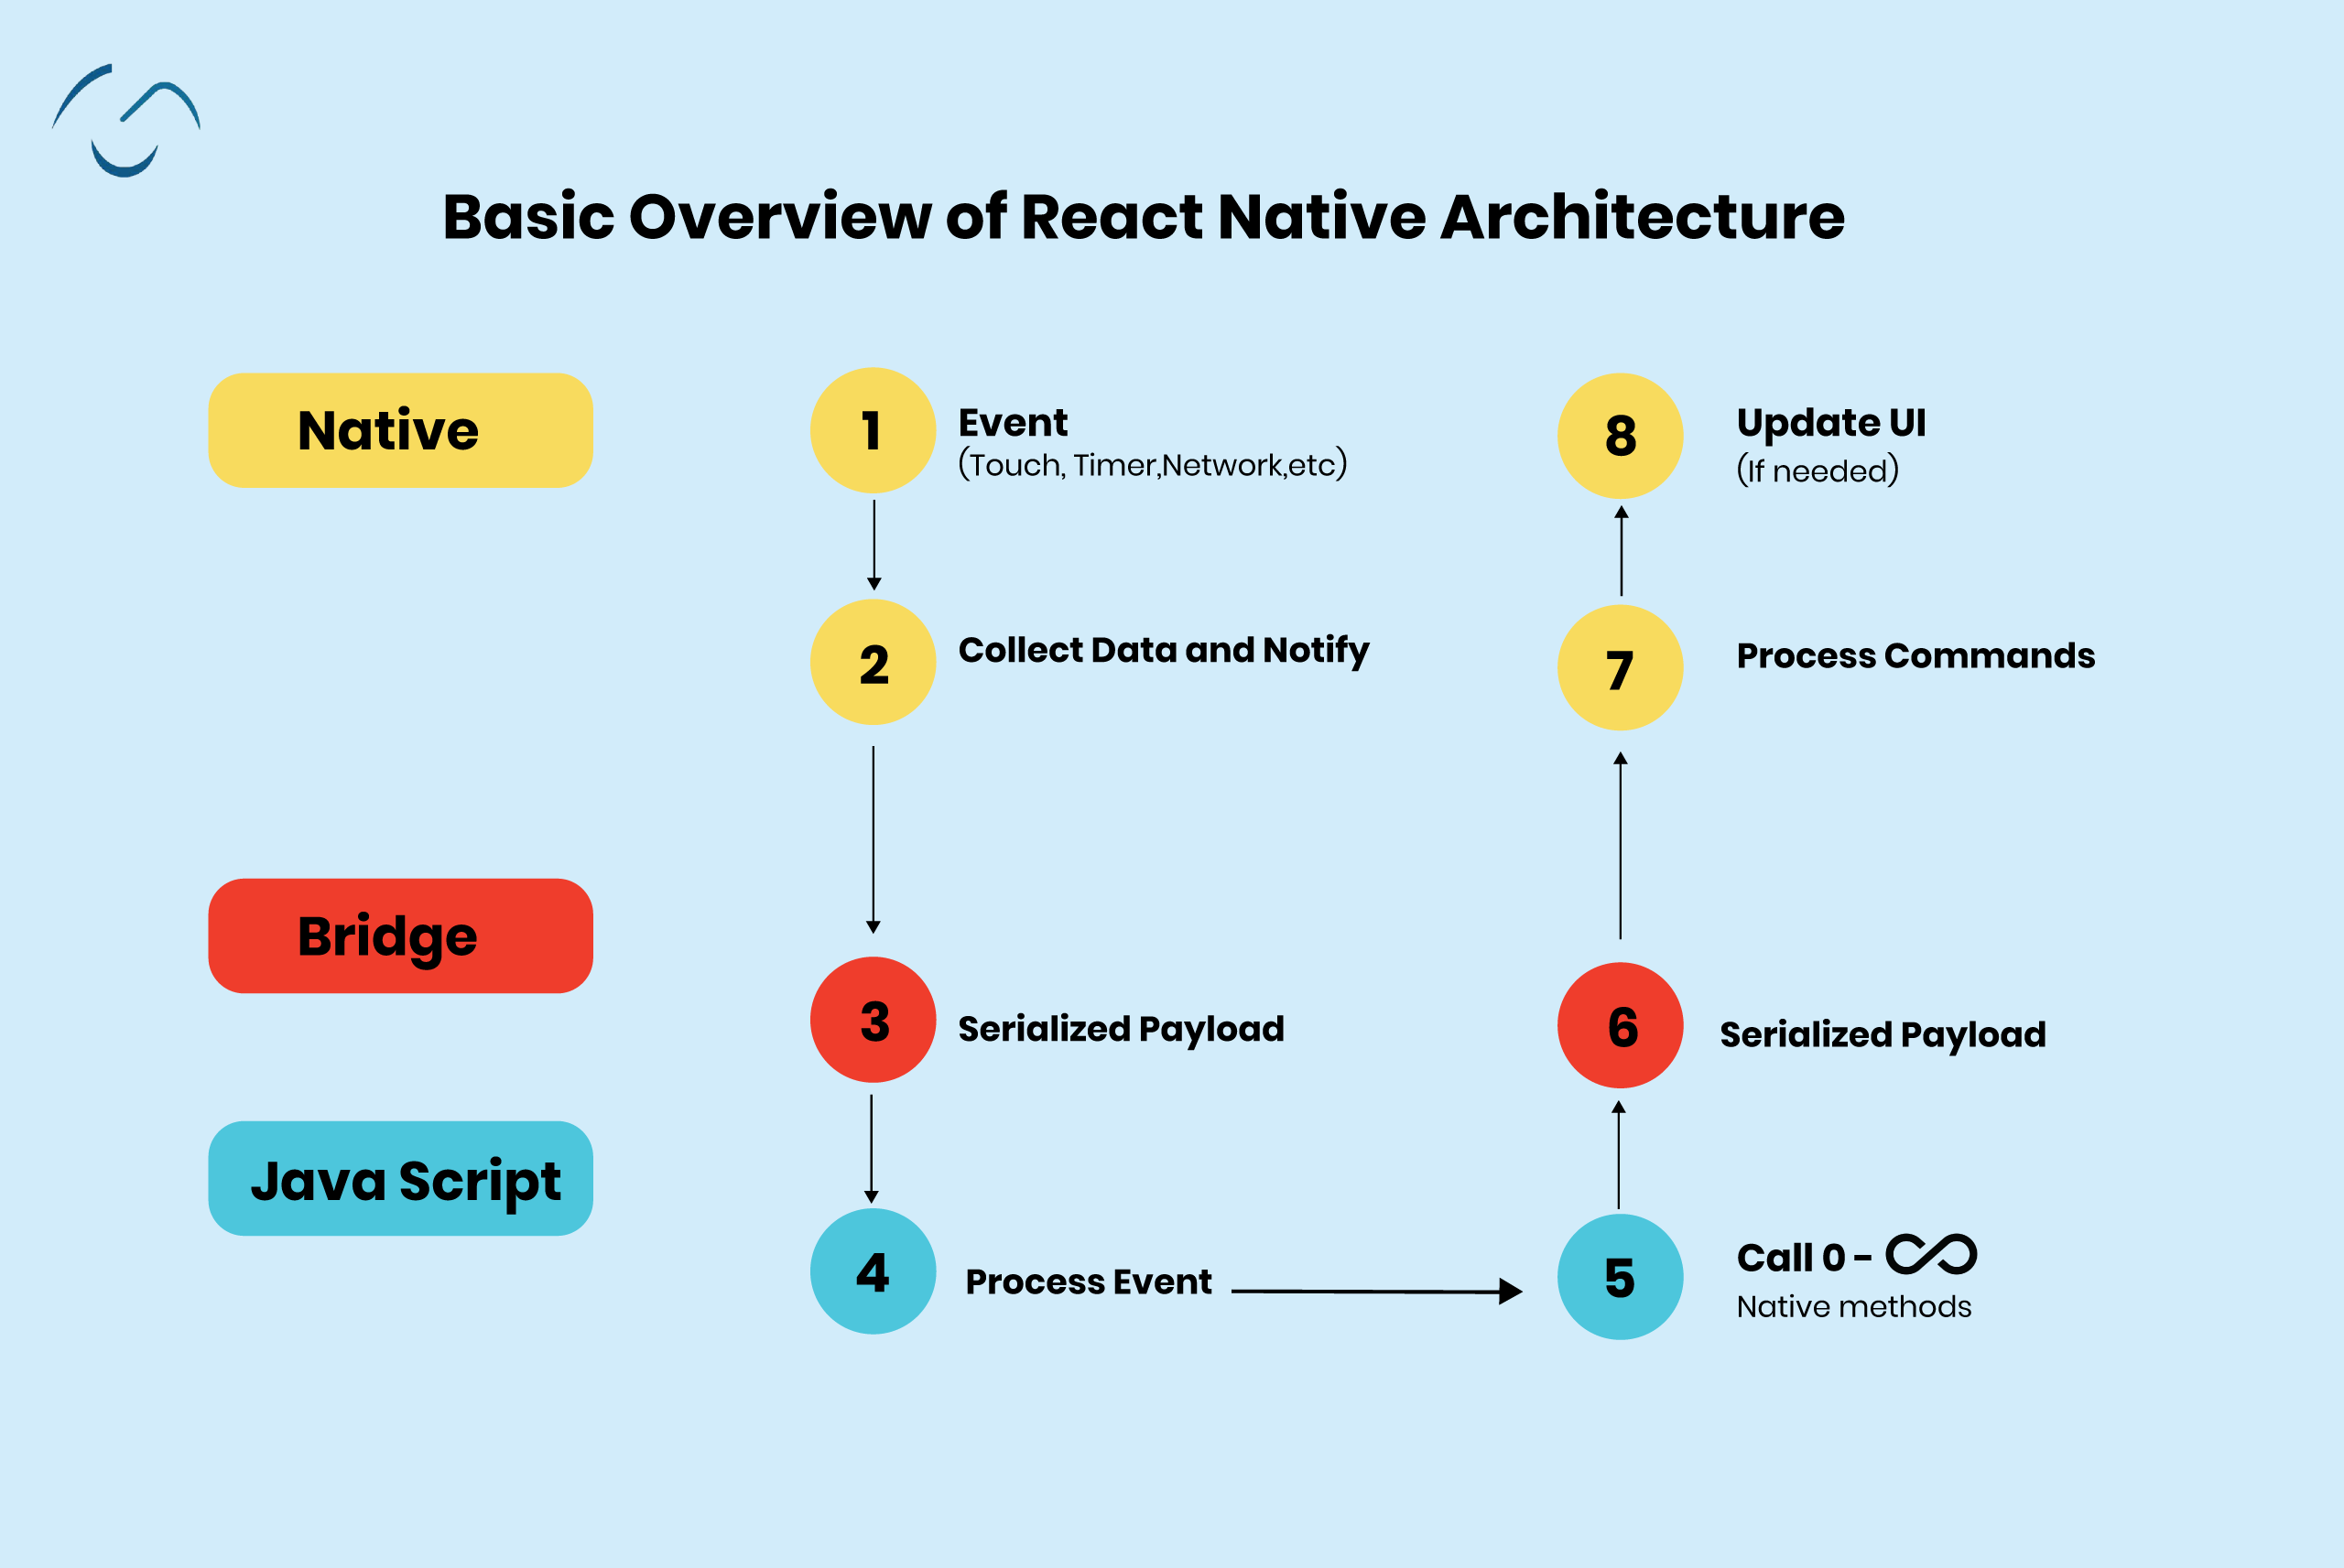 Basic overview of React Native